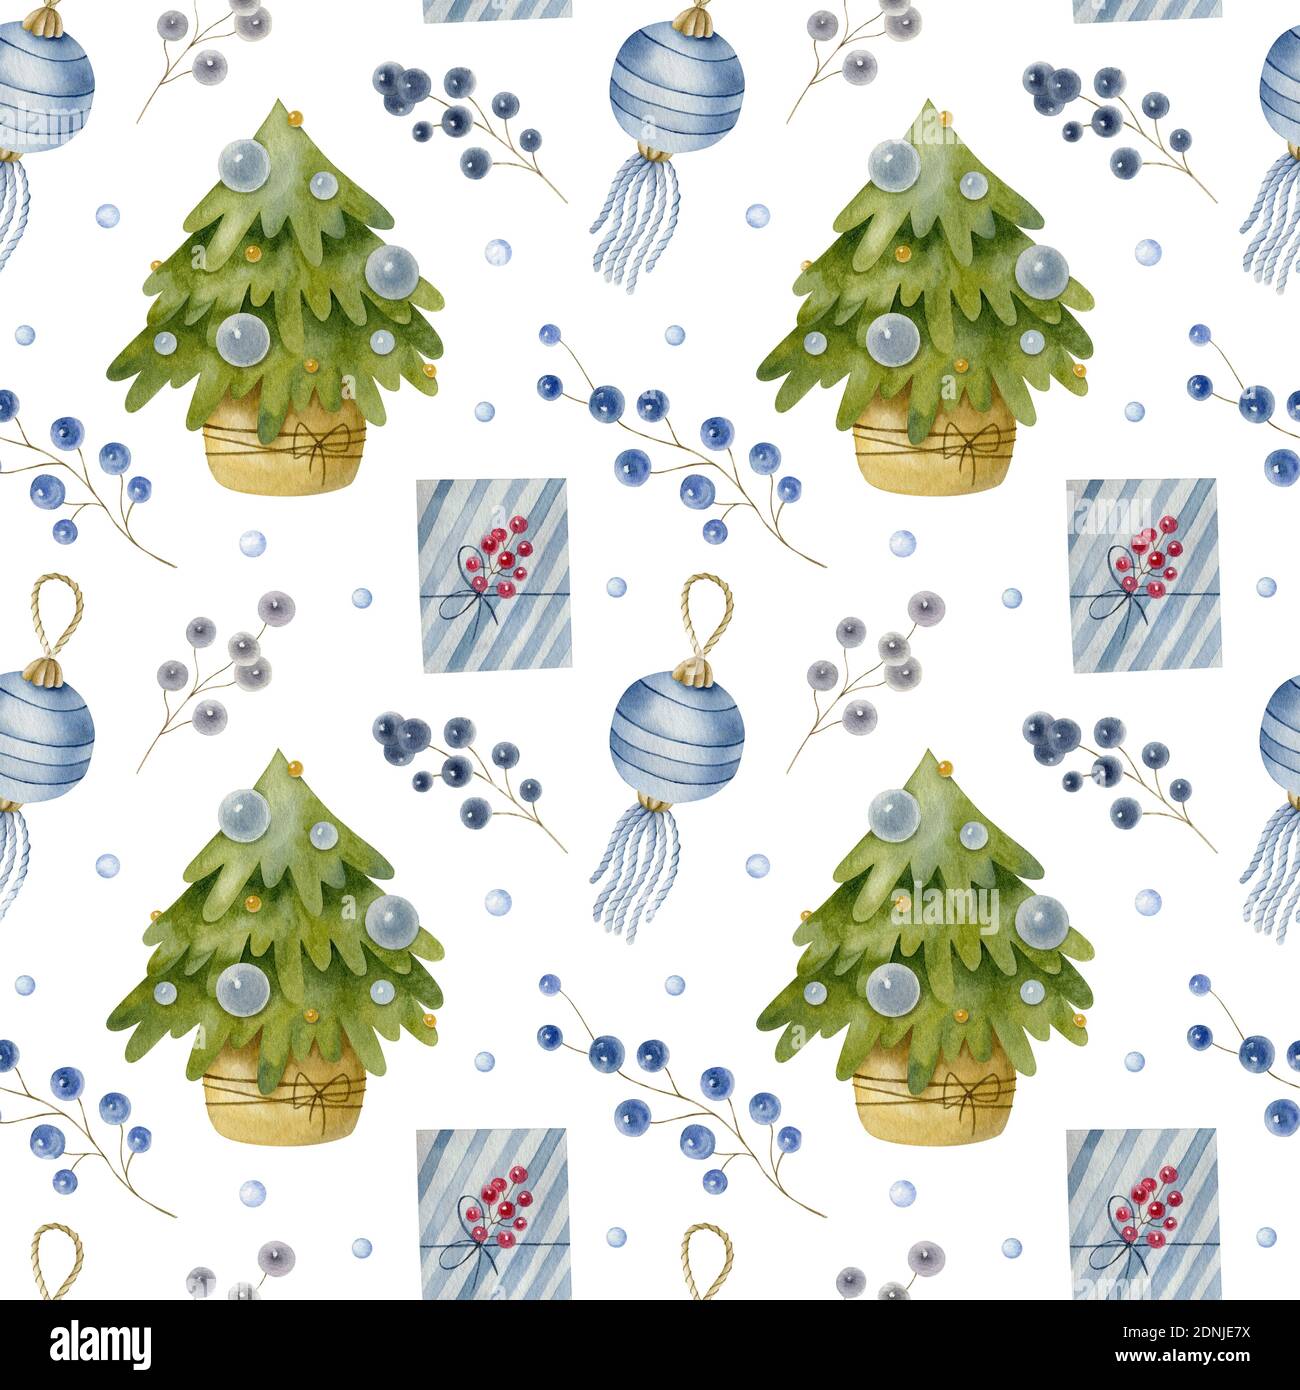 Watercolor Christmas seamless pattern with Christmas tree, ball, berry, and gift. Watercolor festive illustration on the light background. Stock Photo